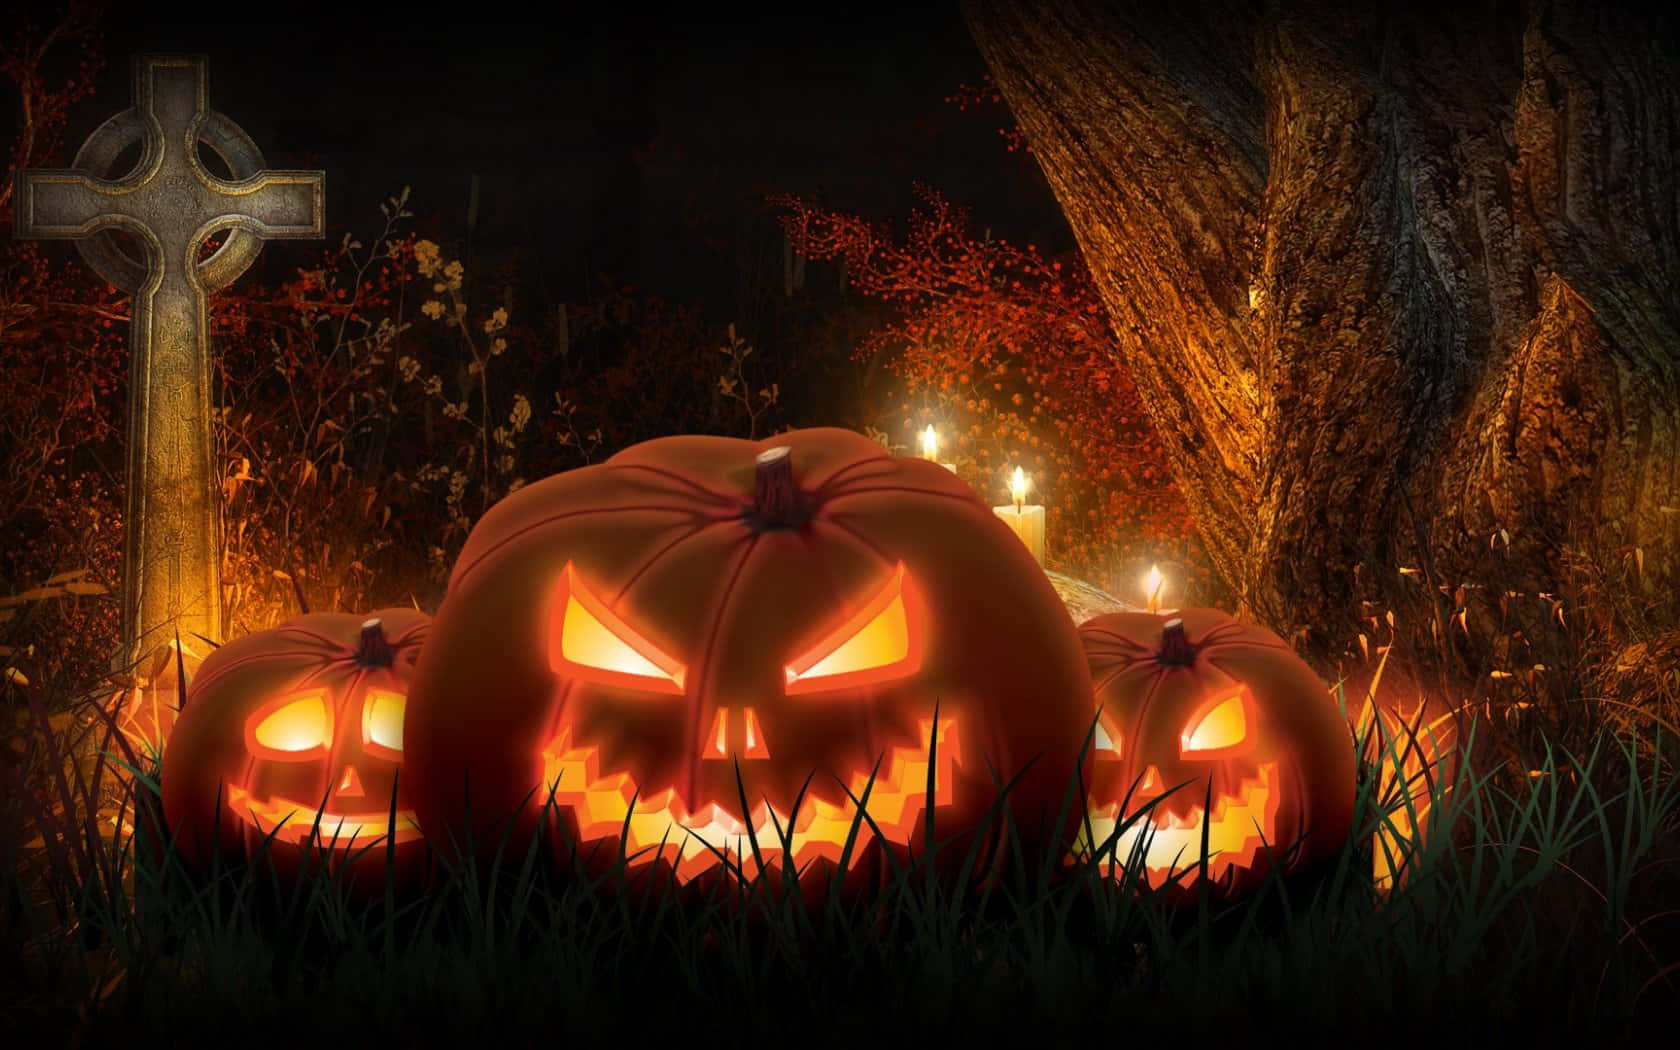 Celebrate Halloween with a spook-tacular background!